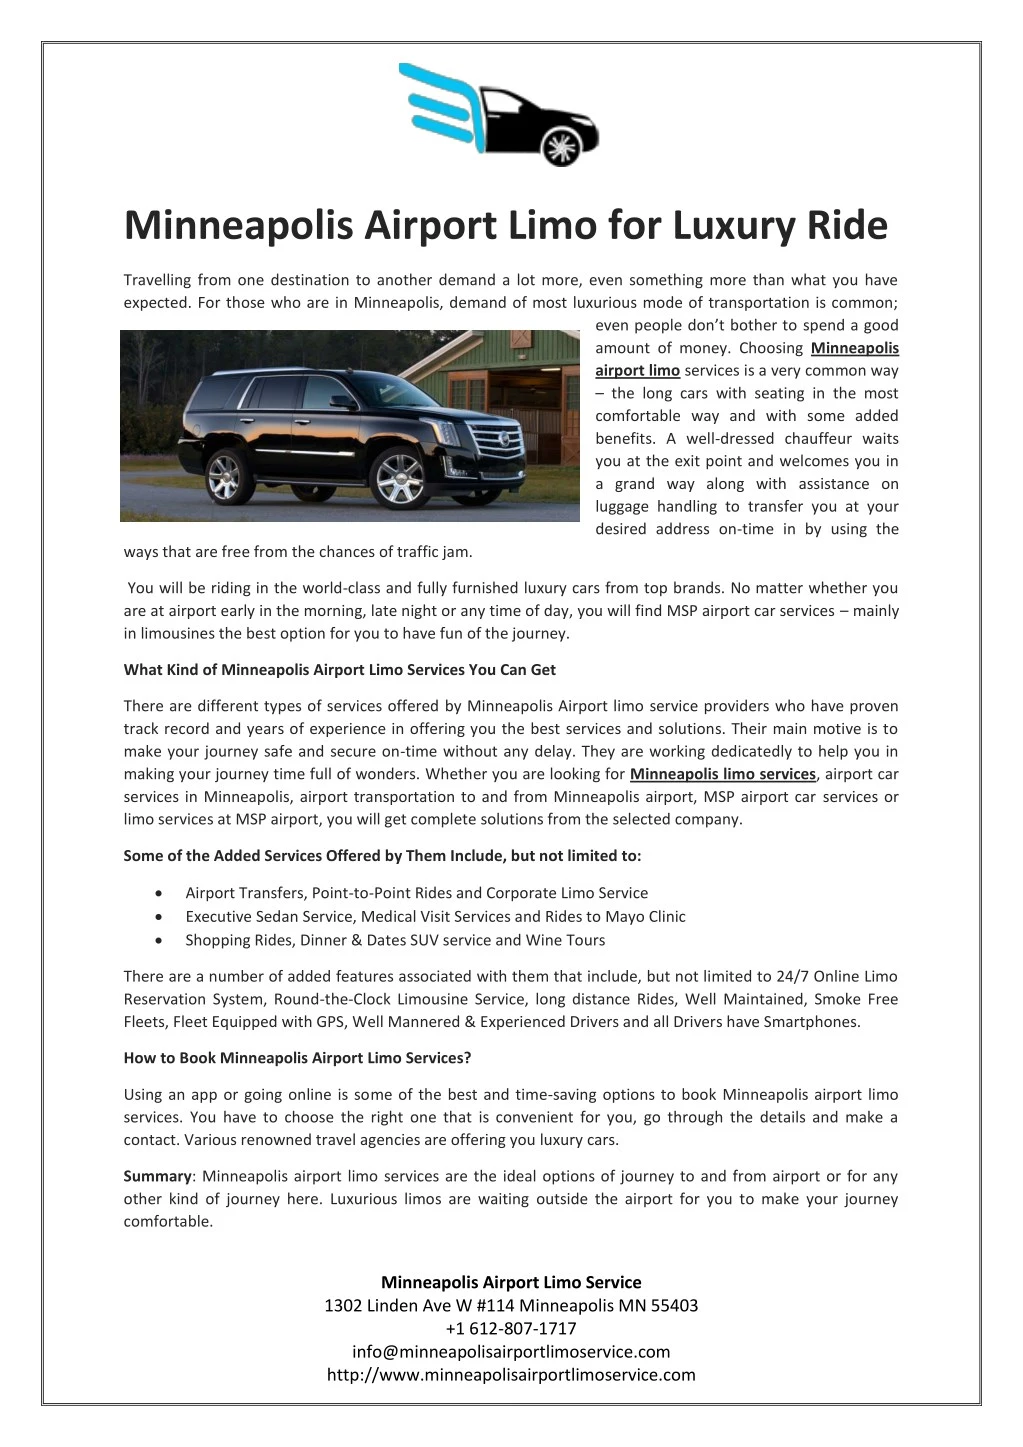 minneapolis airport limo for luxury ride